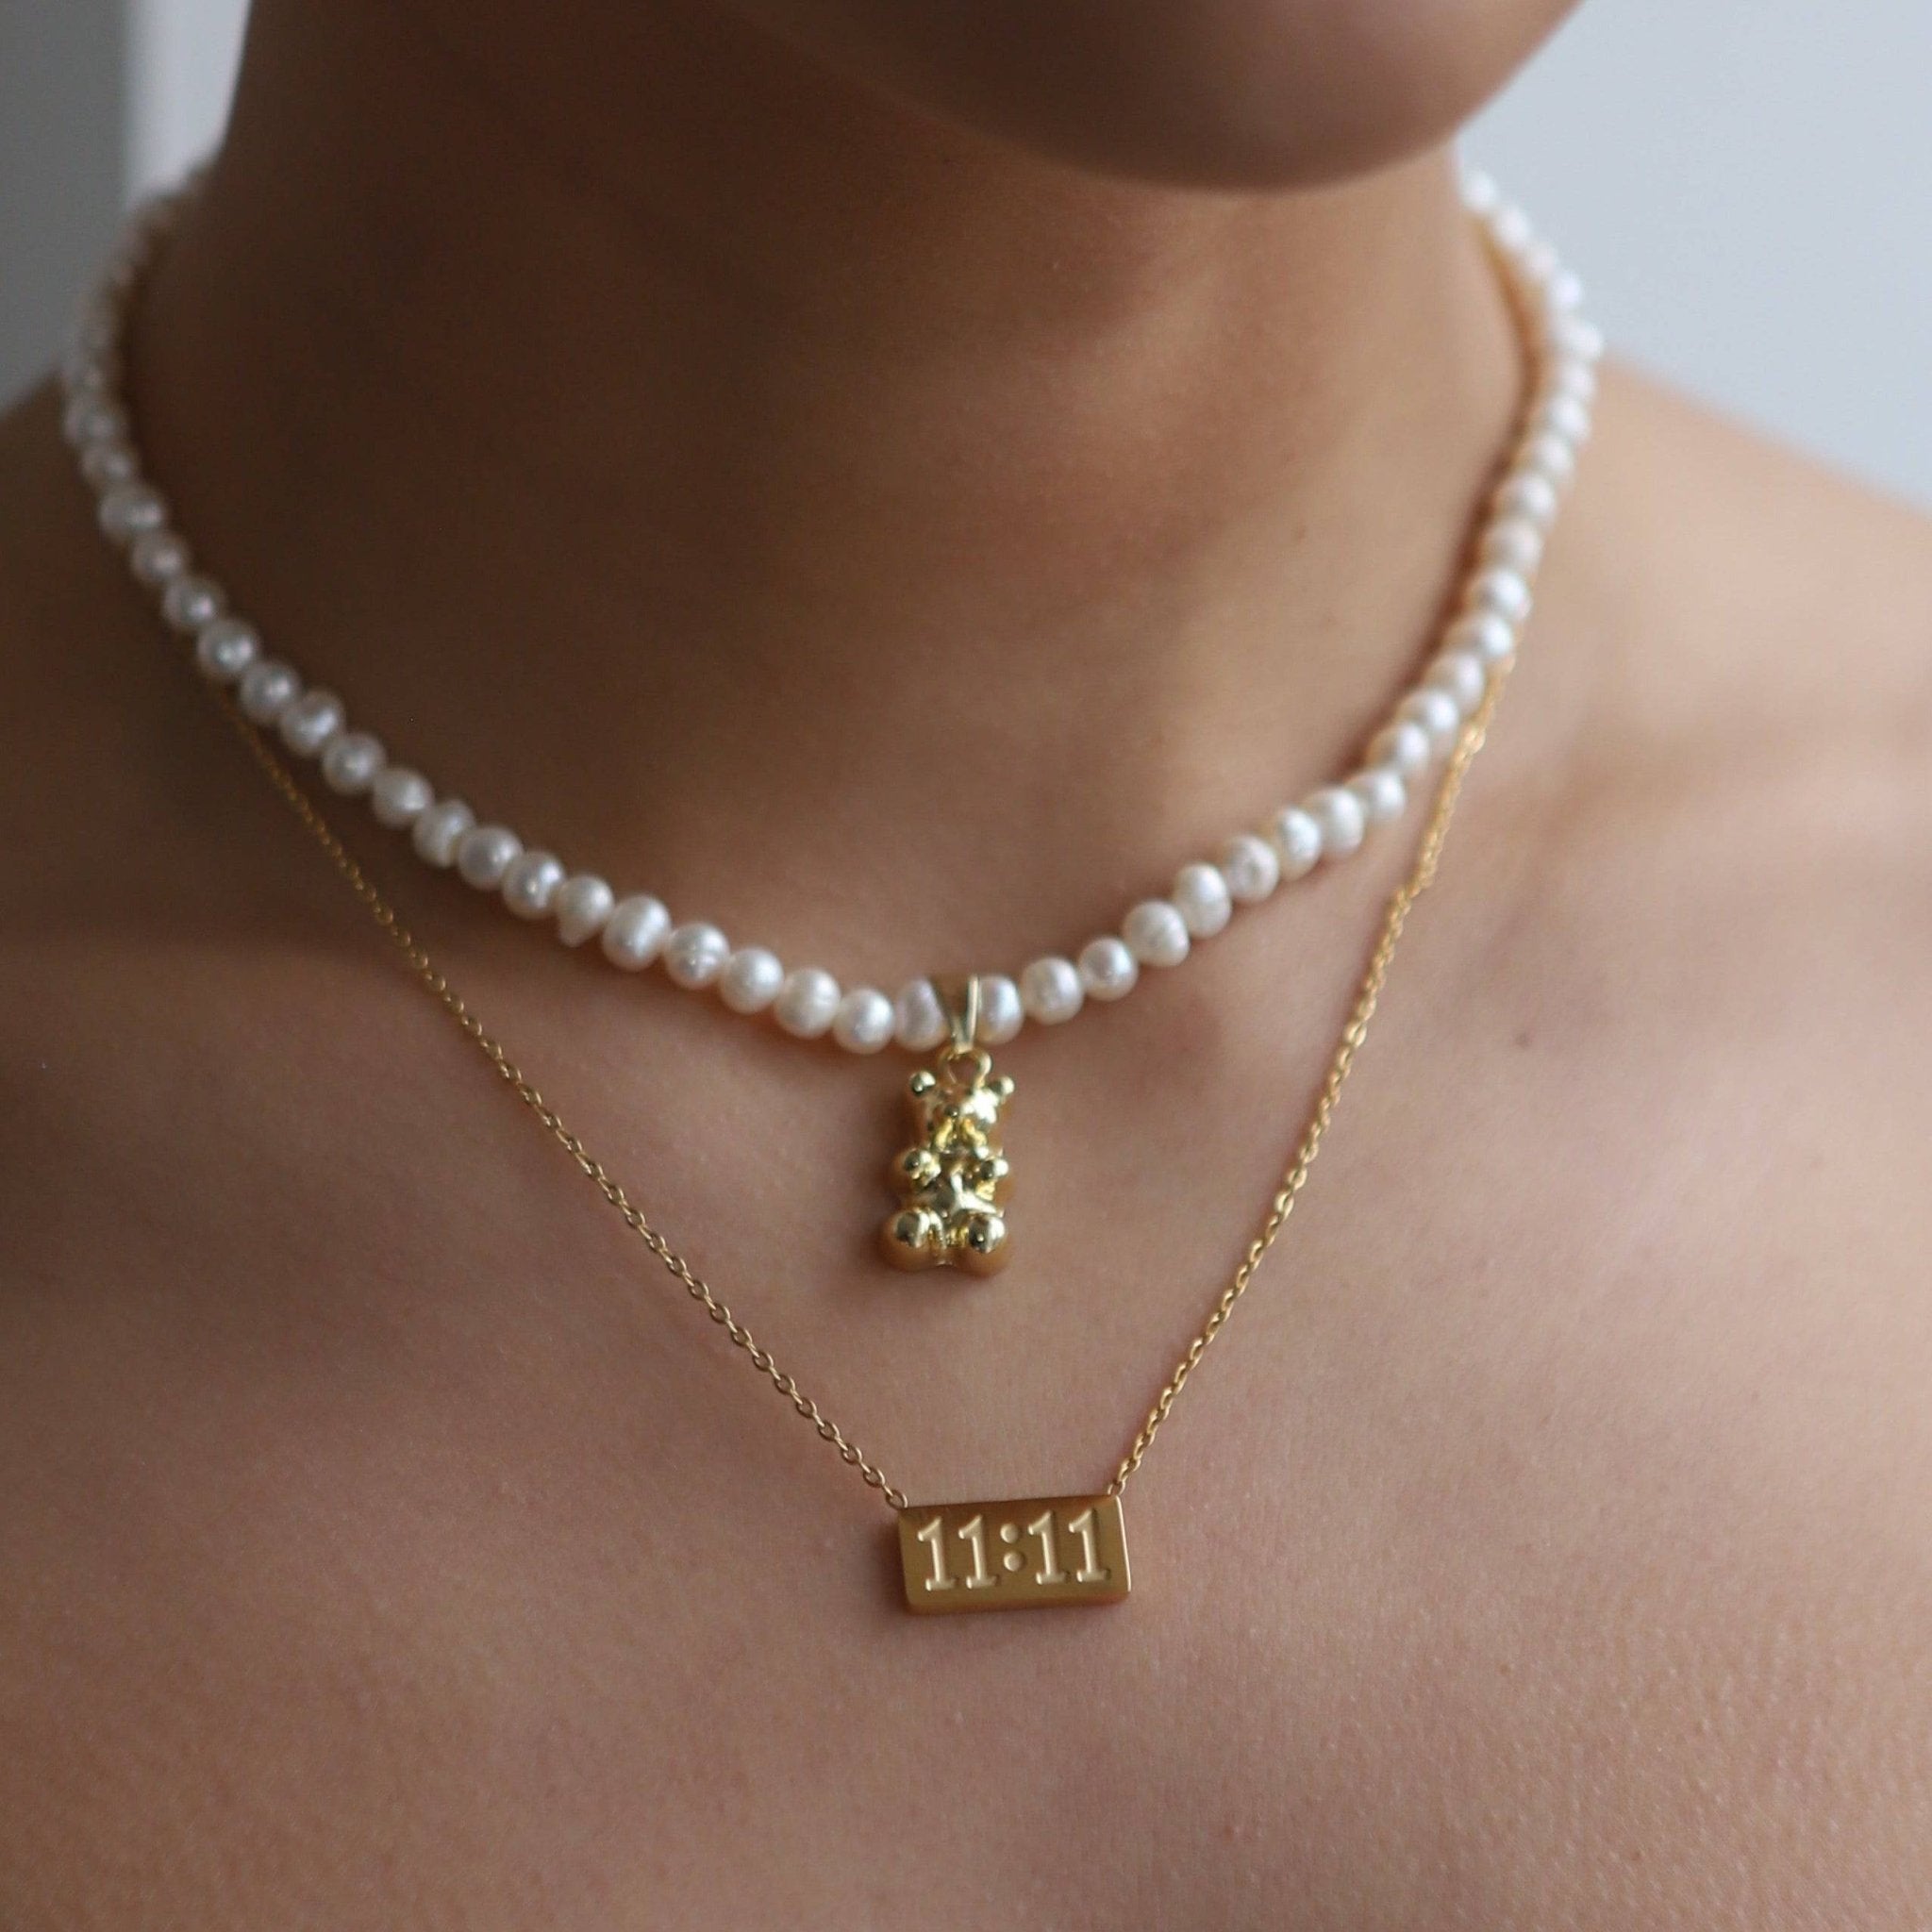 1111 necklace 672224